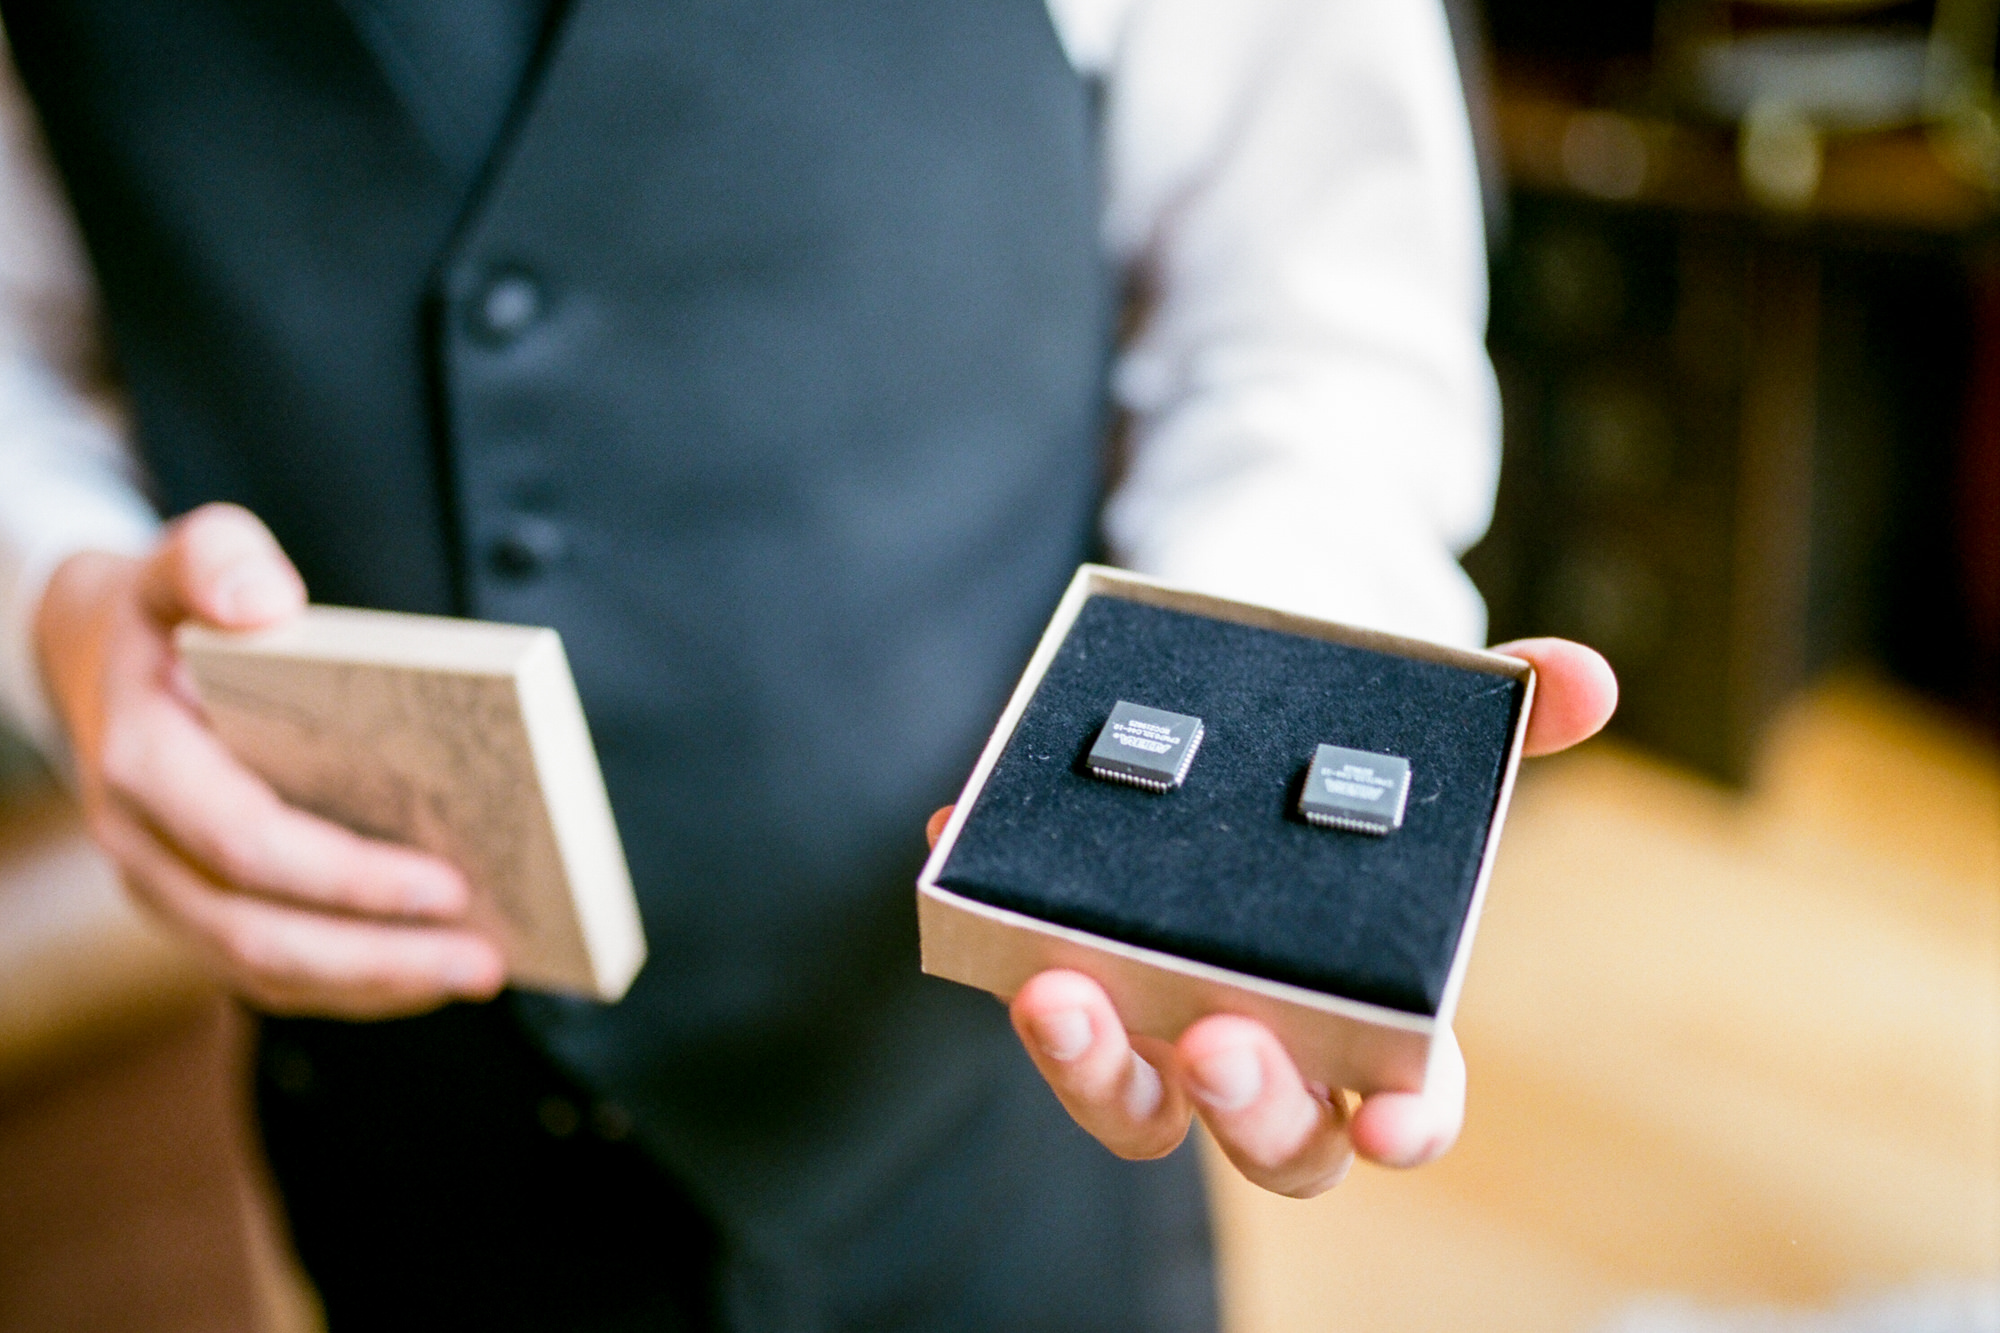 Katherine gave Graeme some cool computer chip cufflinks for their wedding day at KIngston House.